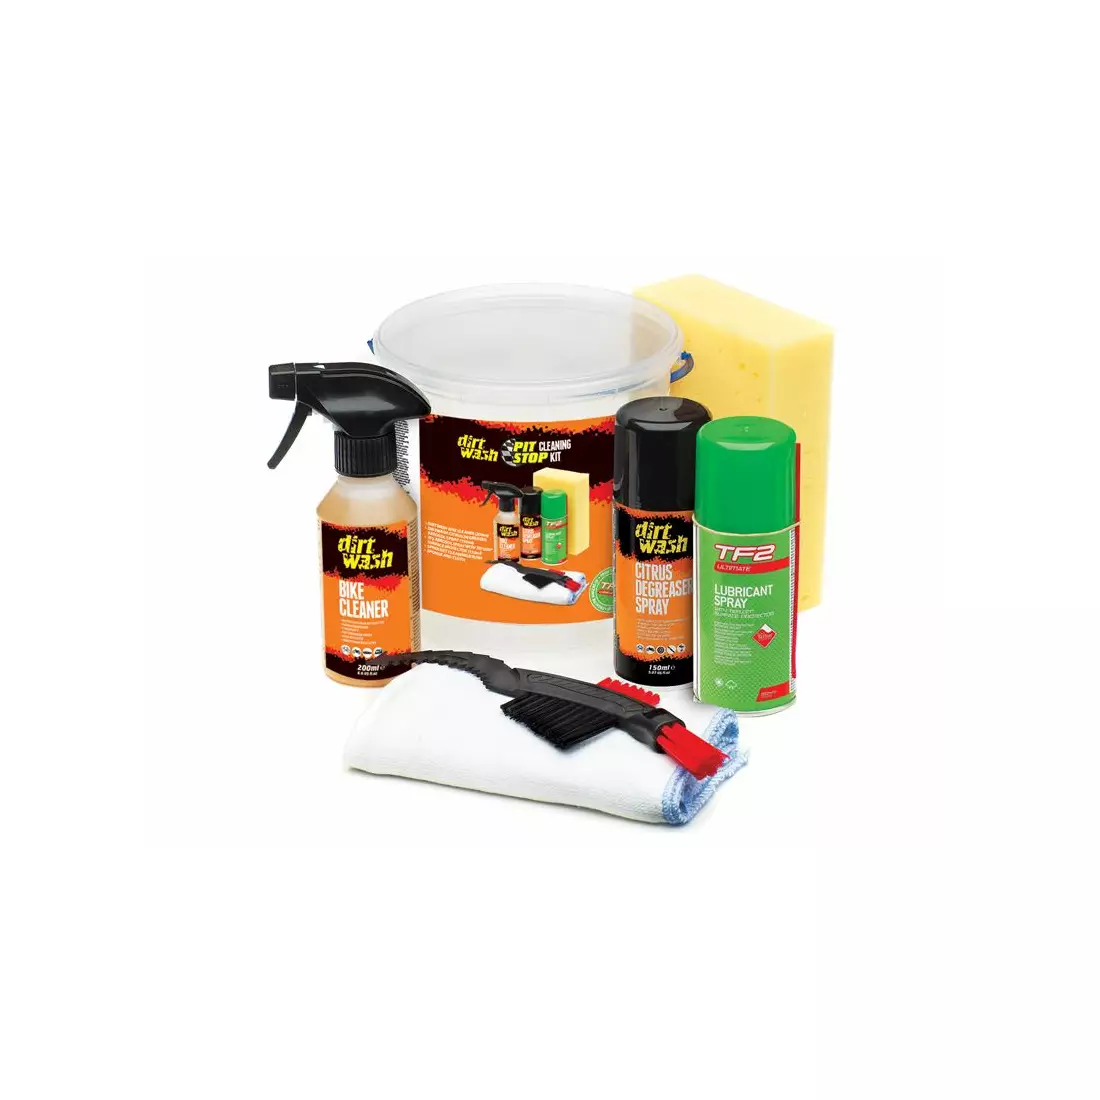 WELDTITE cleaning and maintenance kit dirtwash pit stop cleaning kit WLD-3044